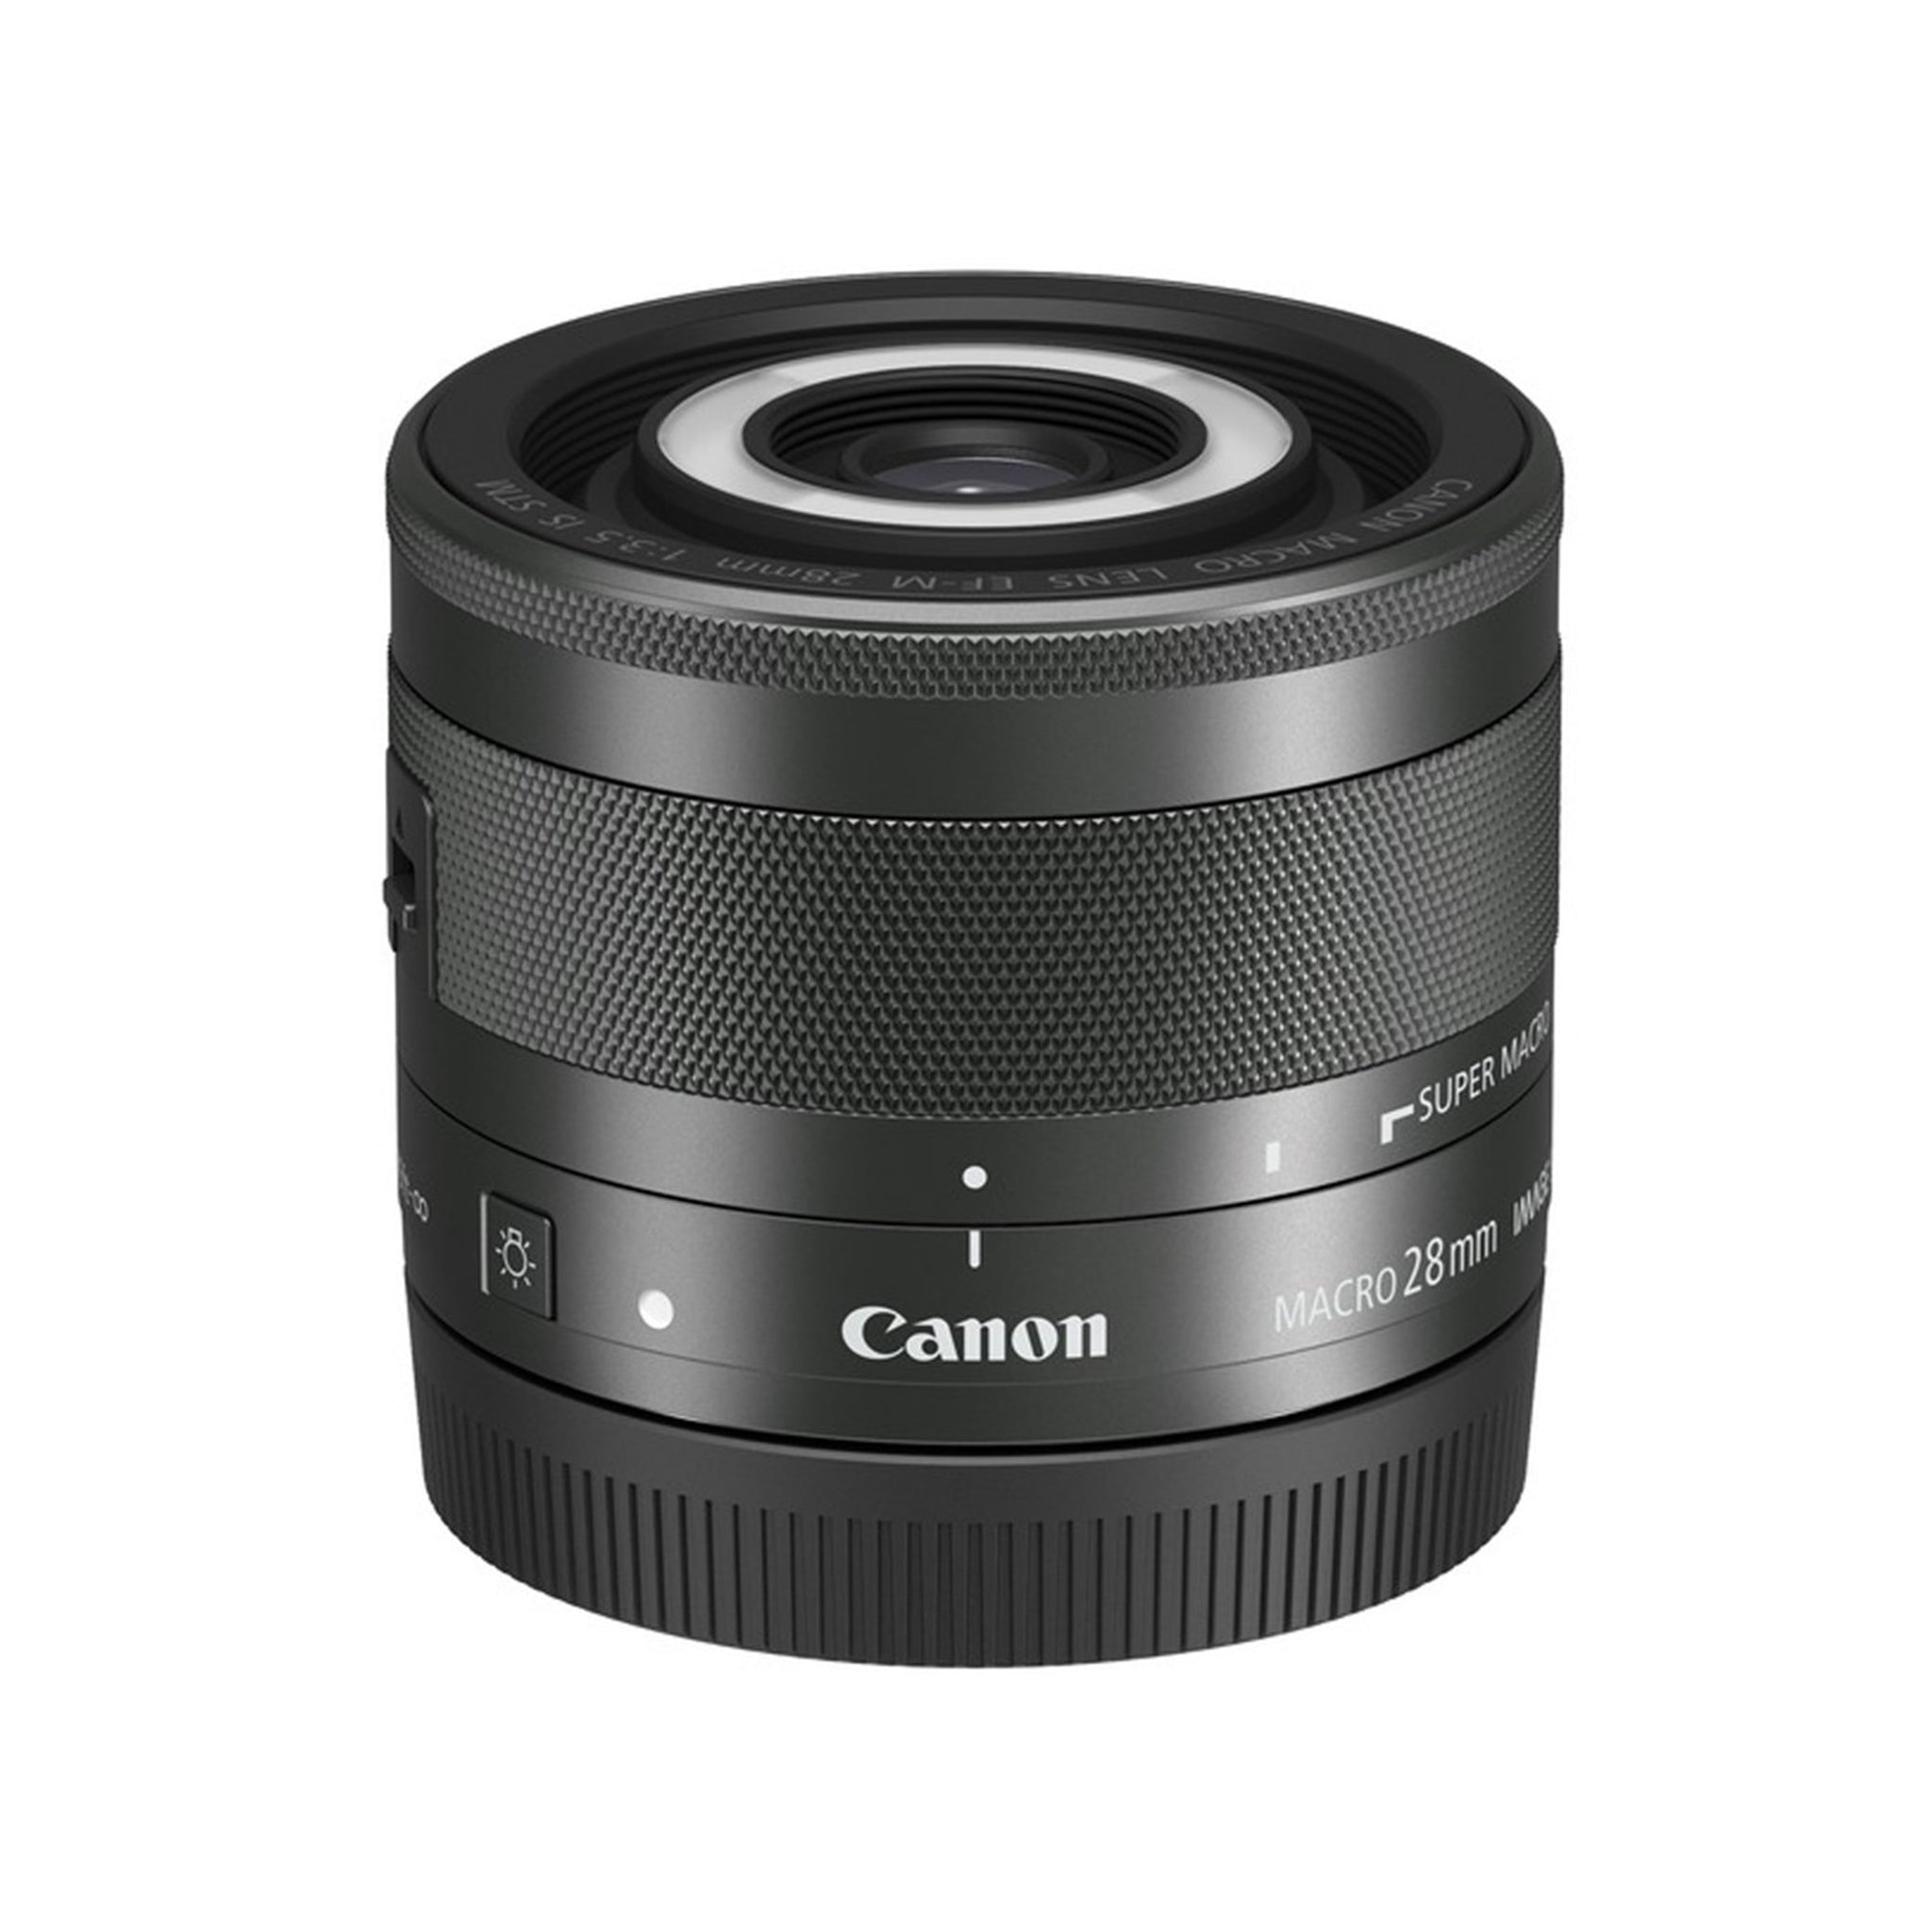 Canon EF-M 28mm F3.5 Macro IS STM Lens